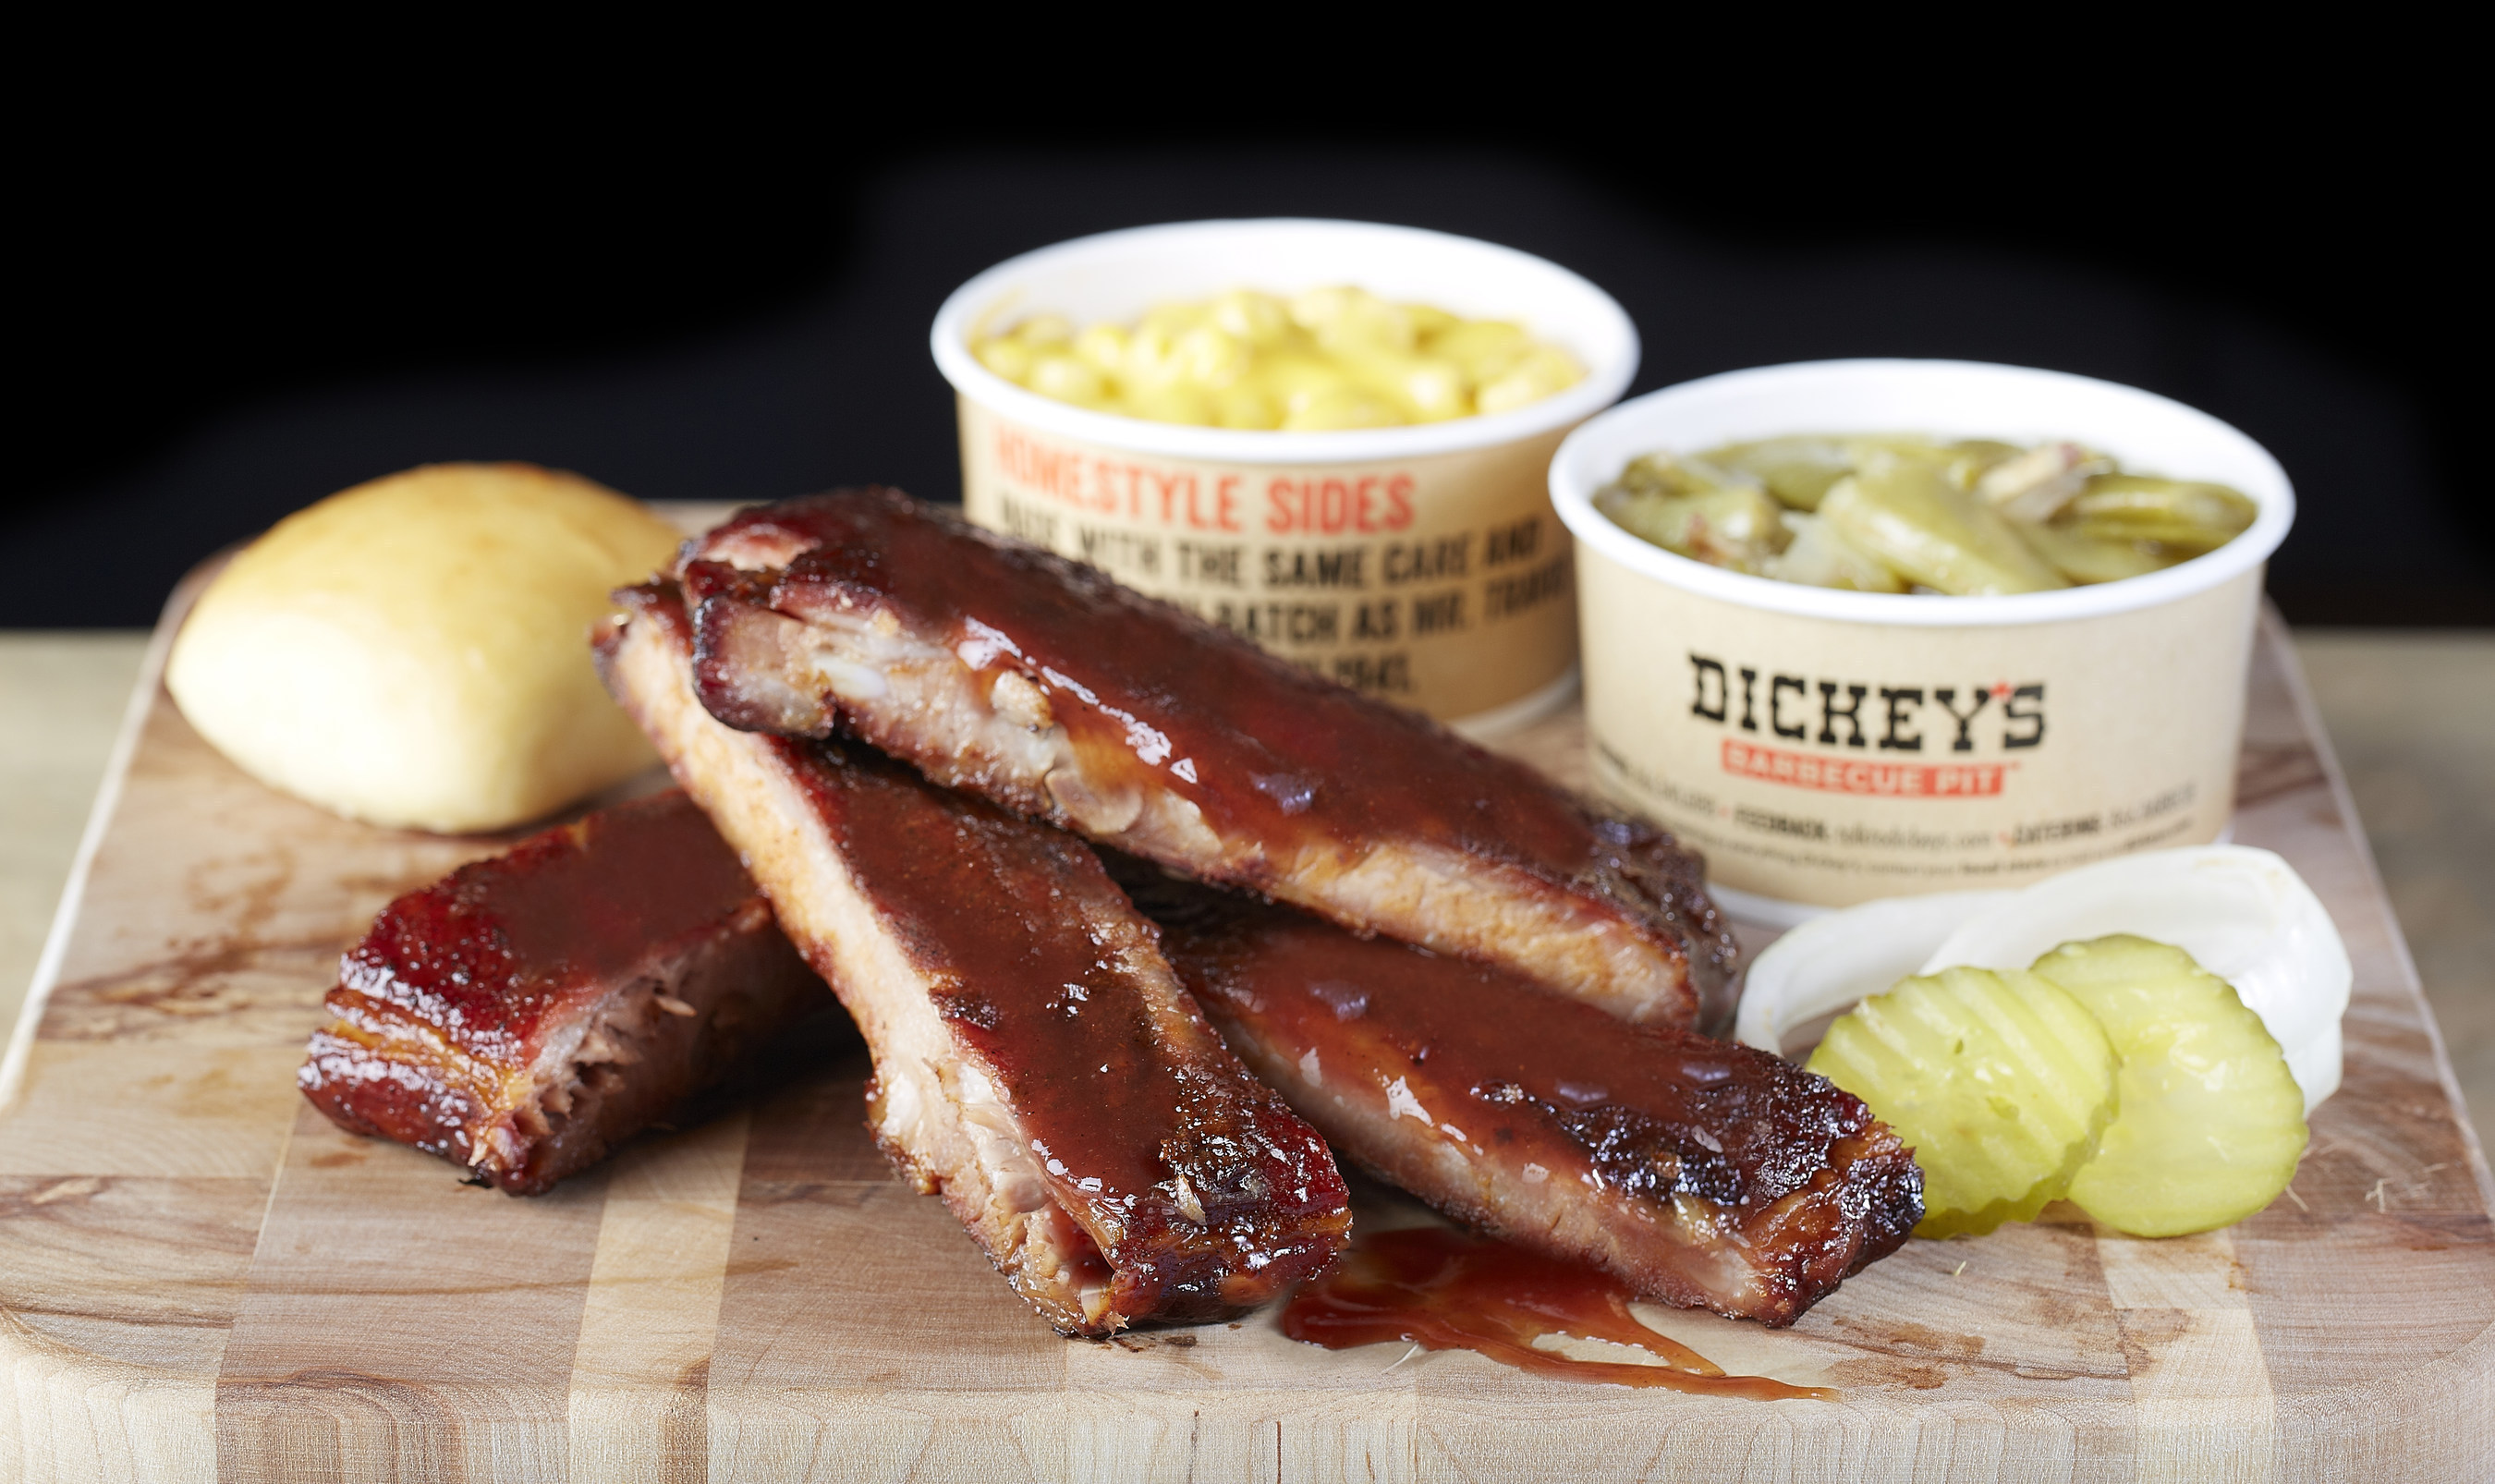 Fullerton residents get slow smokin' Texas barbecue on Thursday when Dickey's Barbecue Pit opens with a three day grand opening.